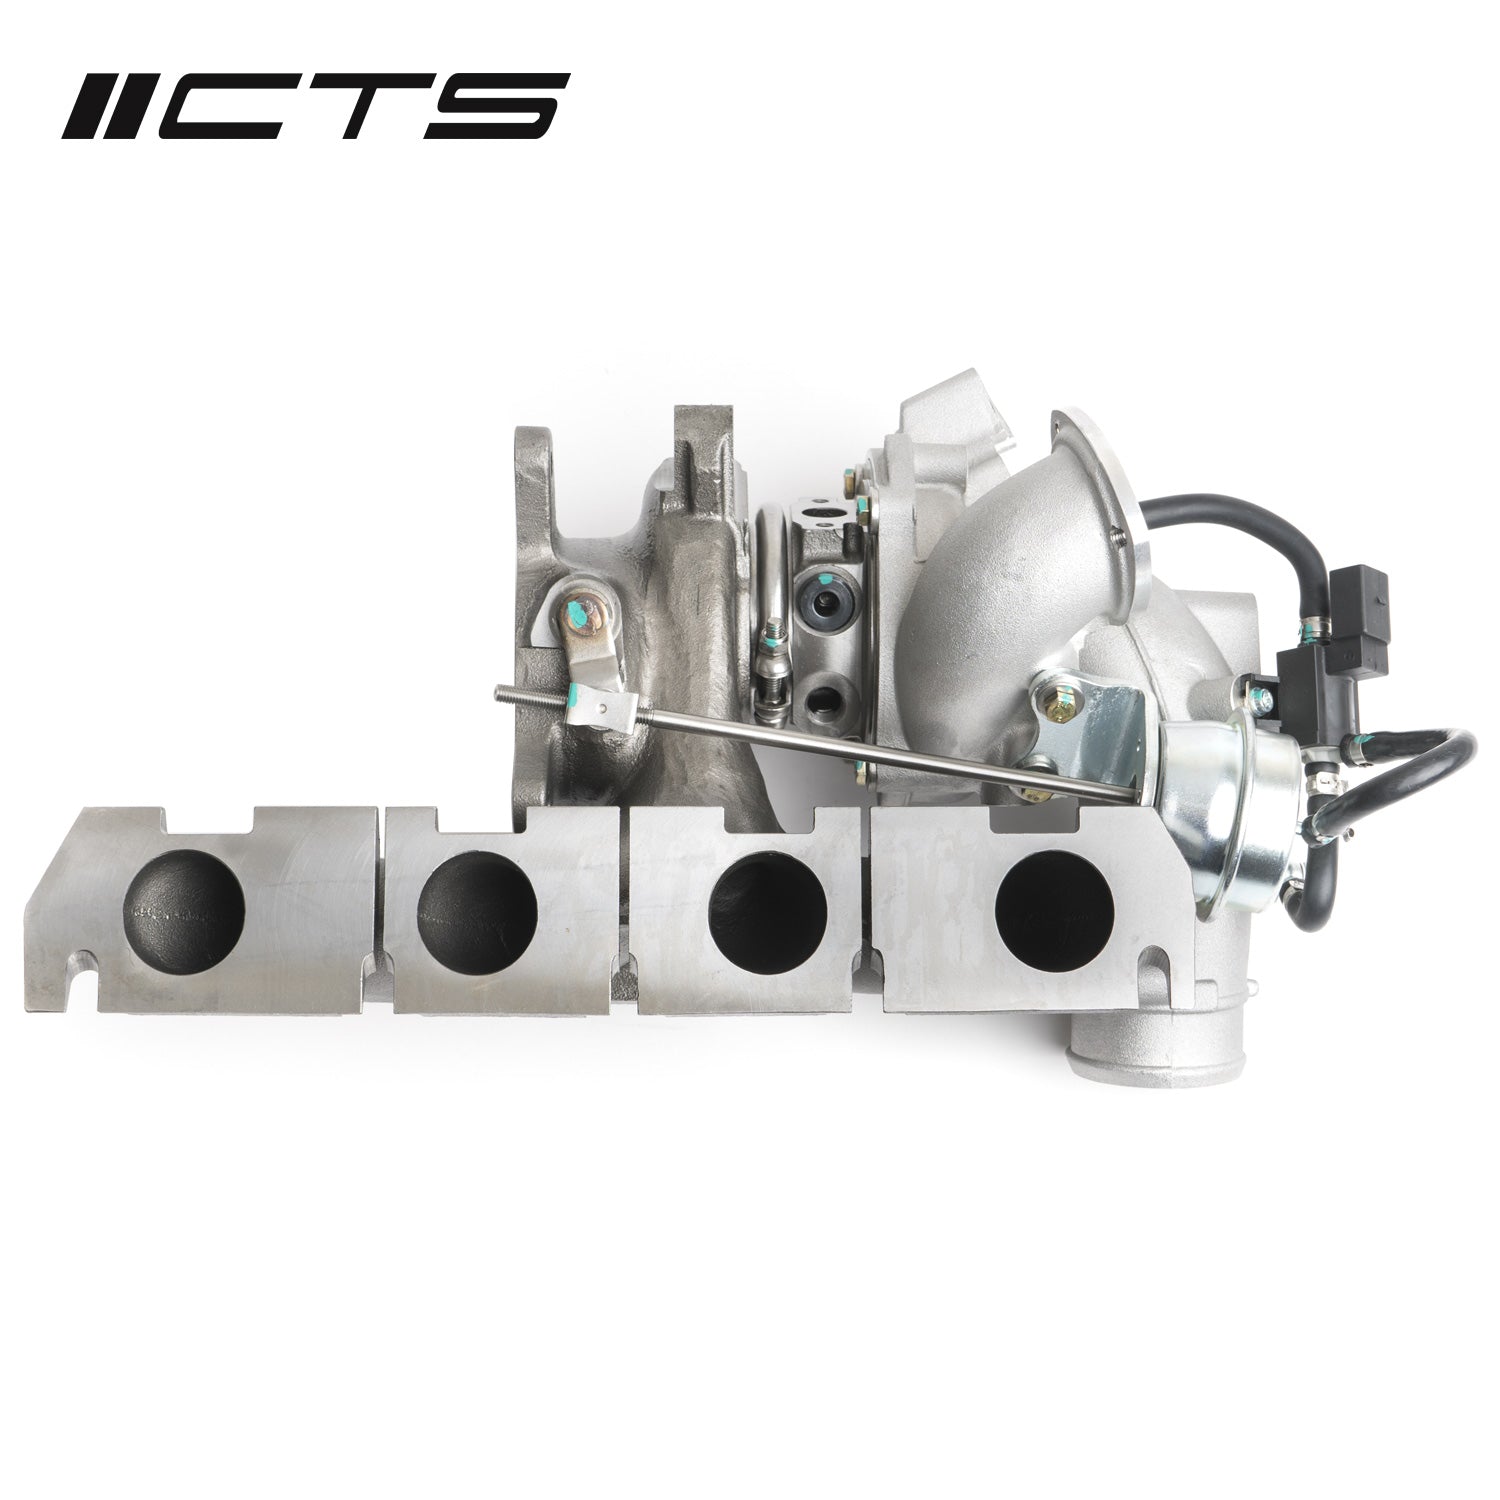 CTS TURBO K04 TURBOCHARGER UPGRADE FOR FSI AND TSI GEN1 ENGINES (EA113 AND EA888.1) - 0